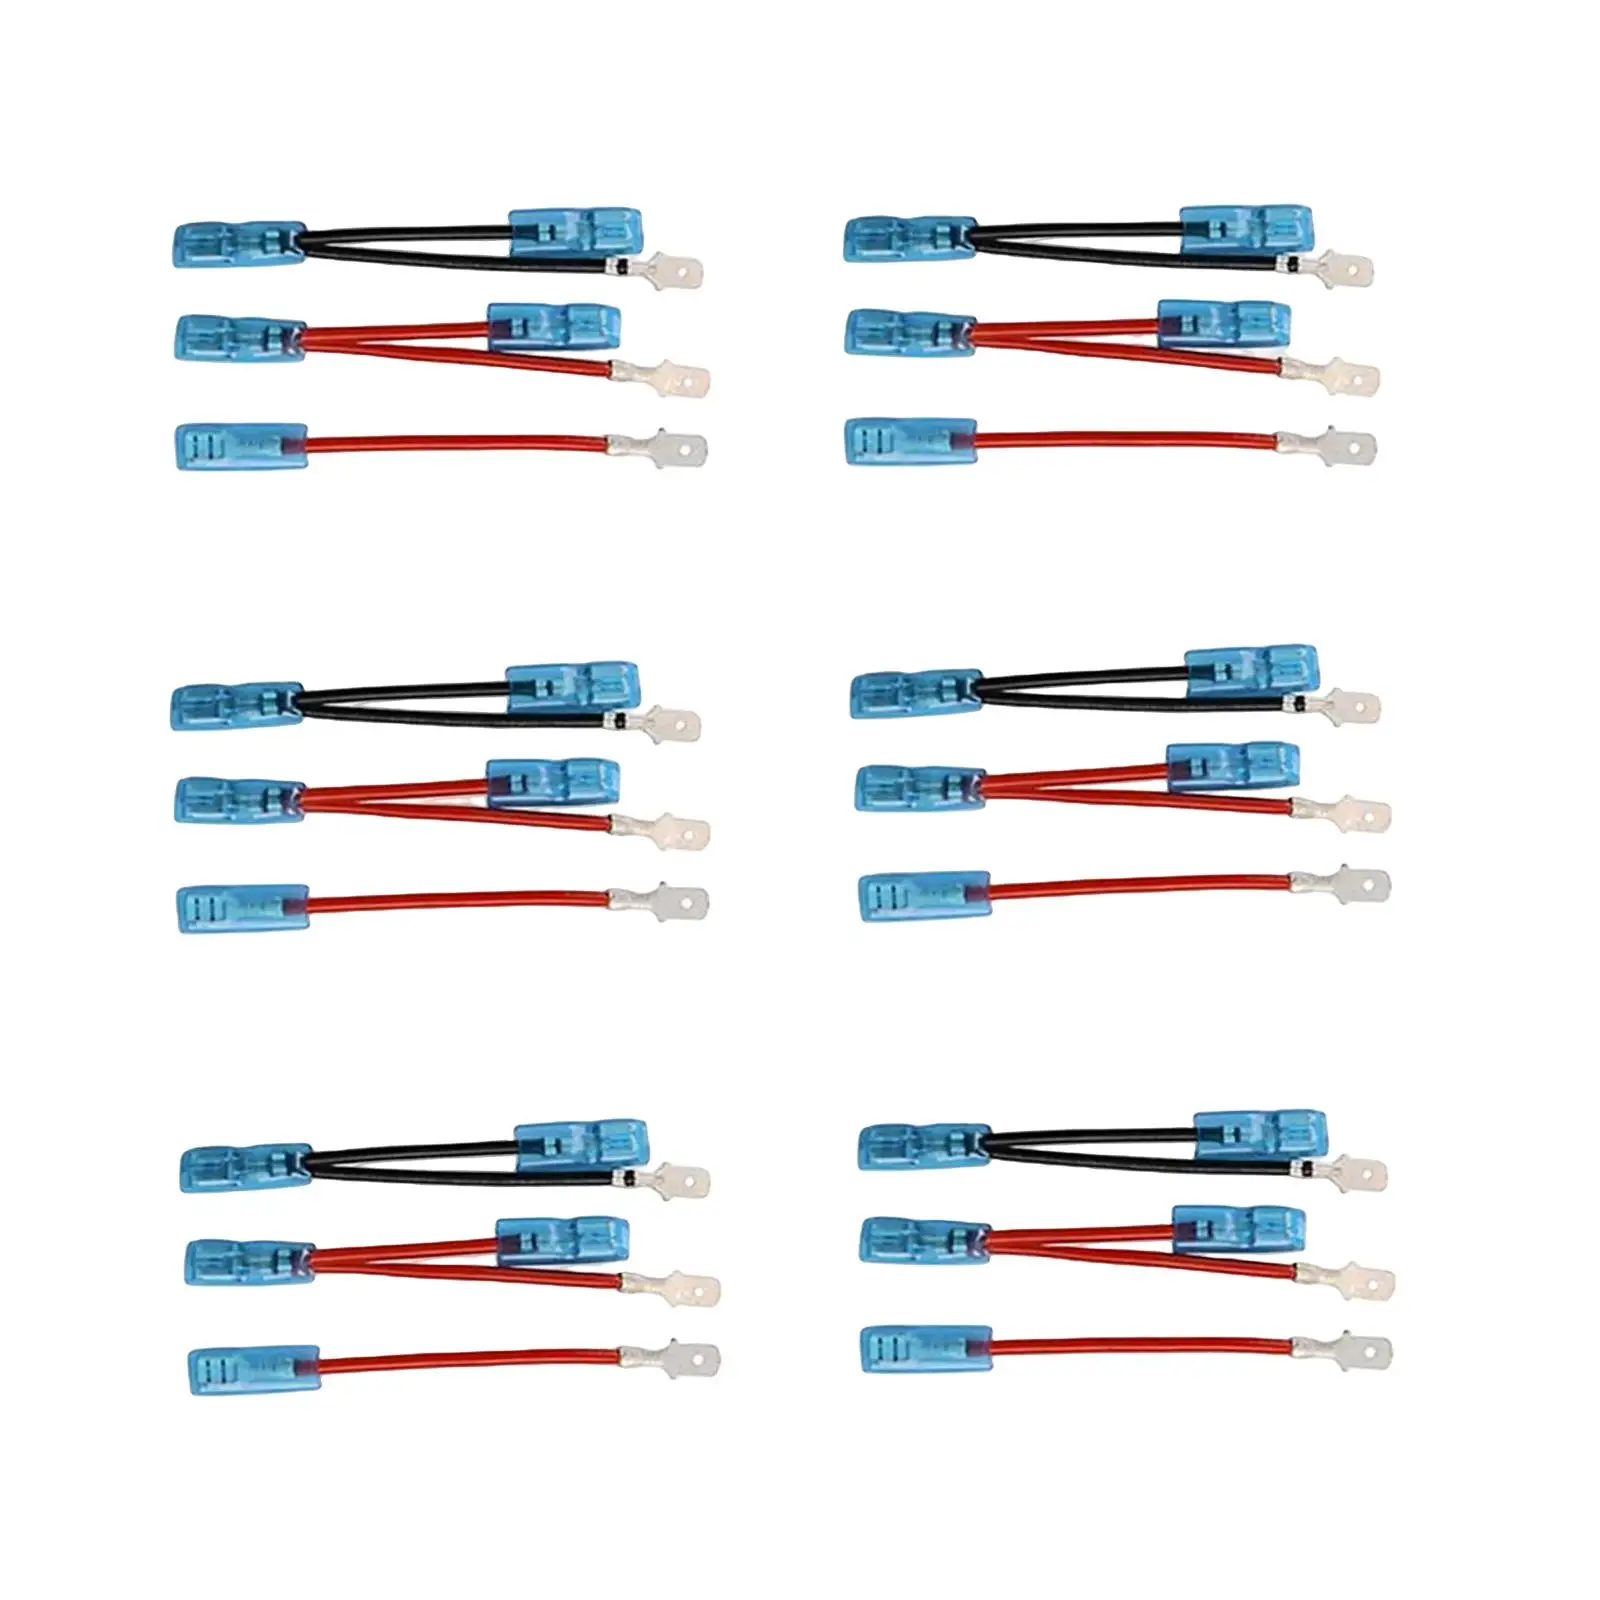 6x 5 Pin Rocker Switch Jumper Wires Set Professional Durable for Boat